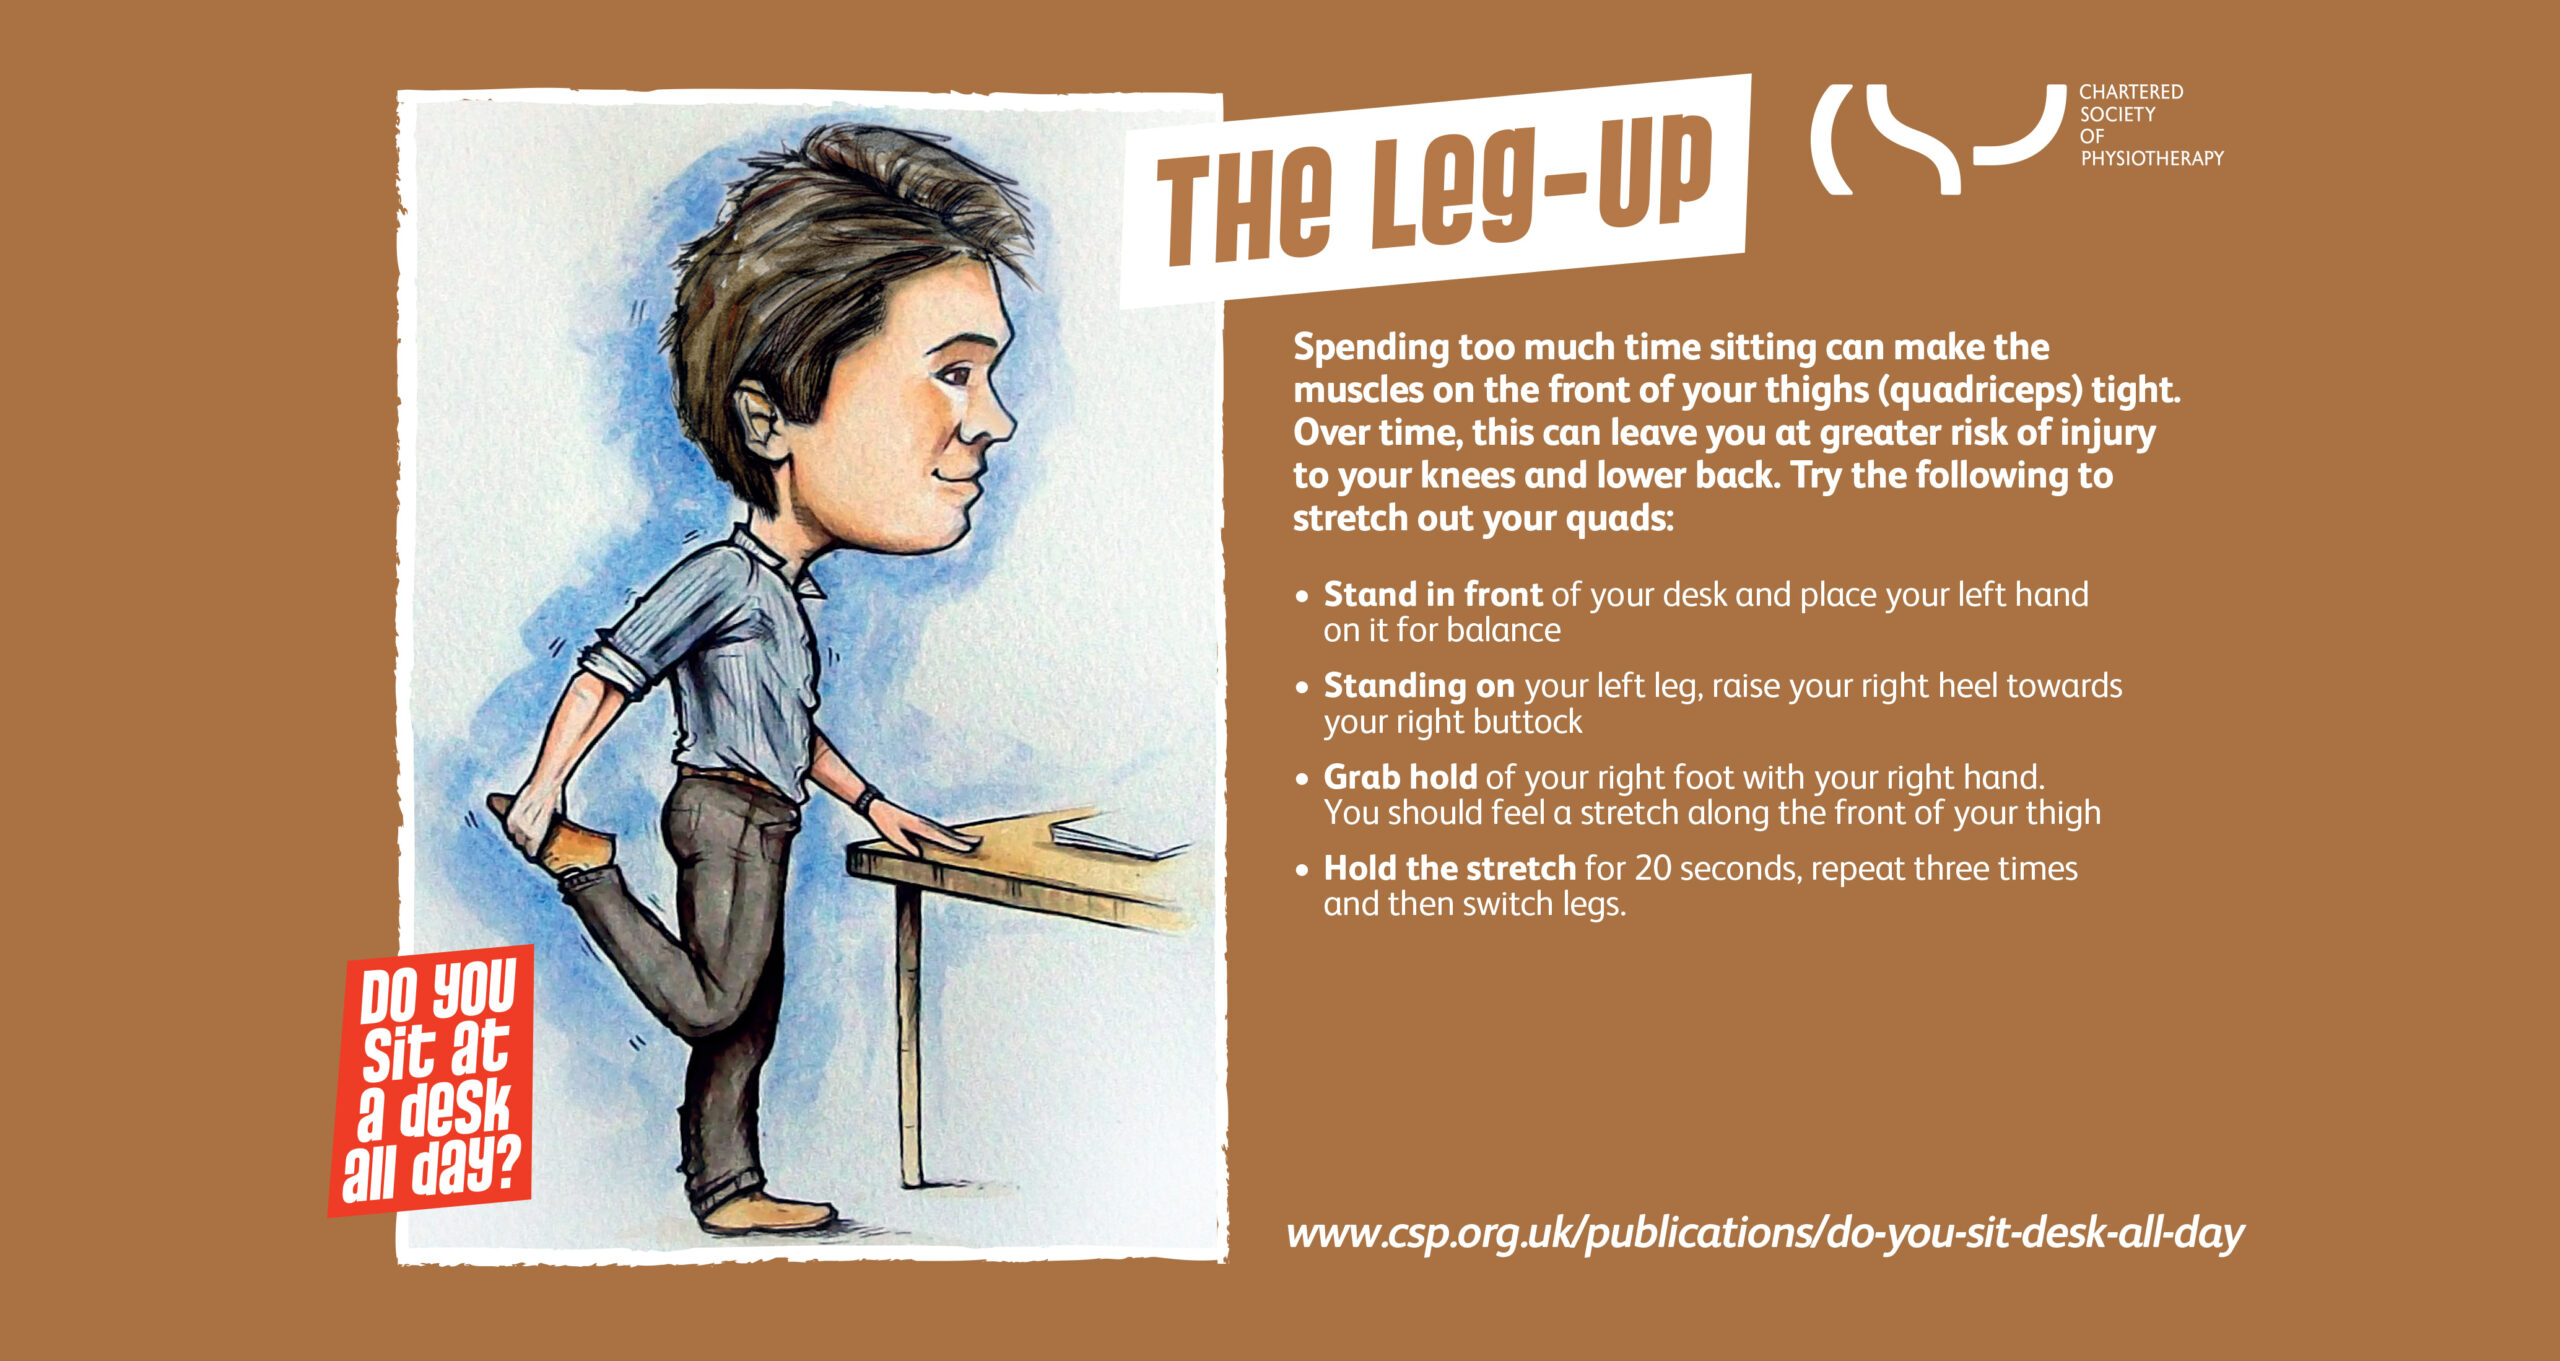 Chartered society of physiotherapy exercise card for the Leg-up